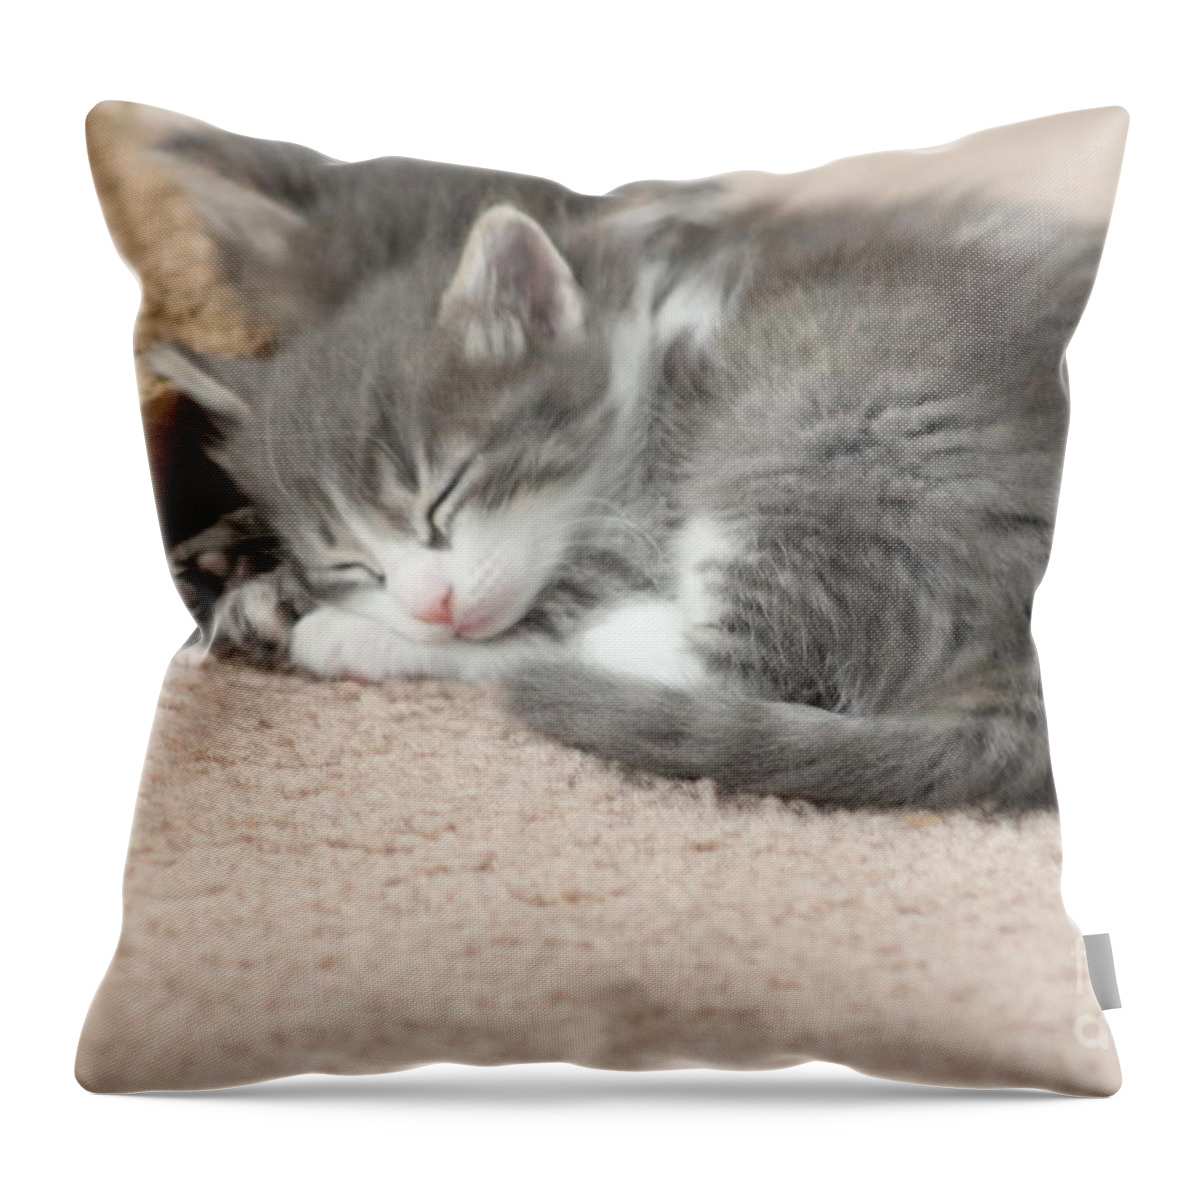 Cat Throw Pillow featuring the photograph Sleeping Kitten by Michelle Powell